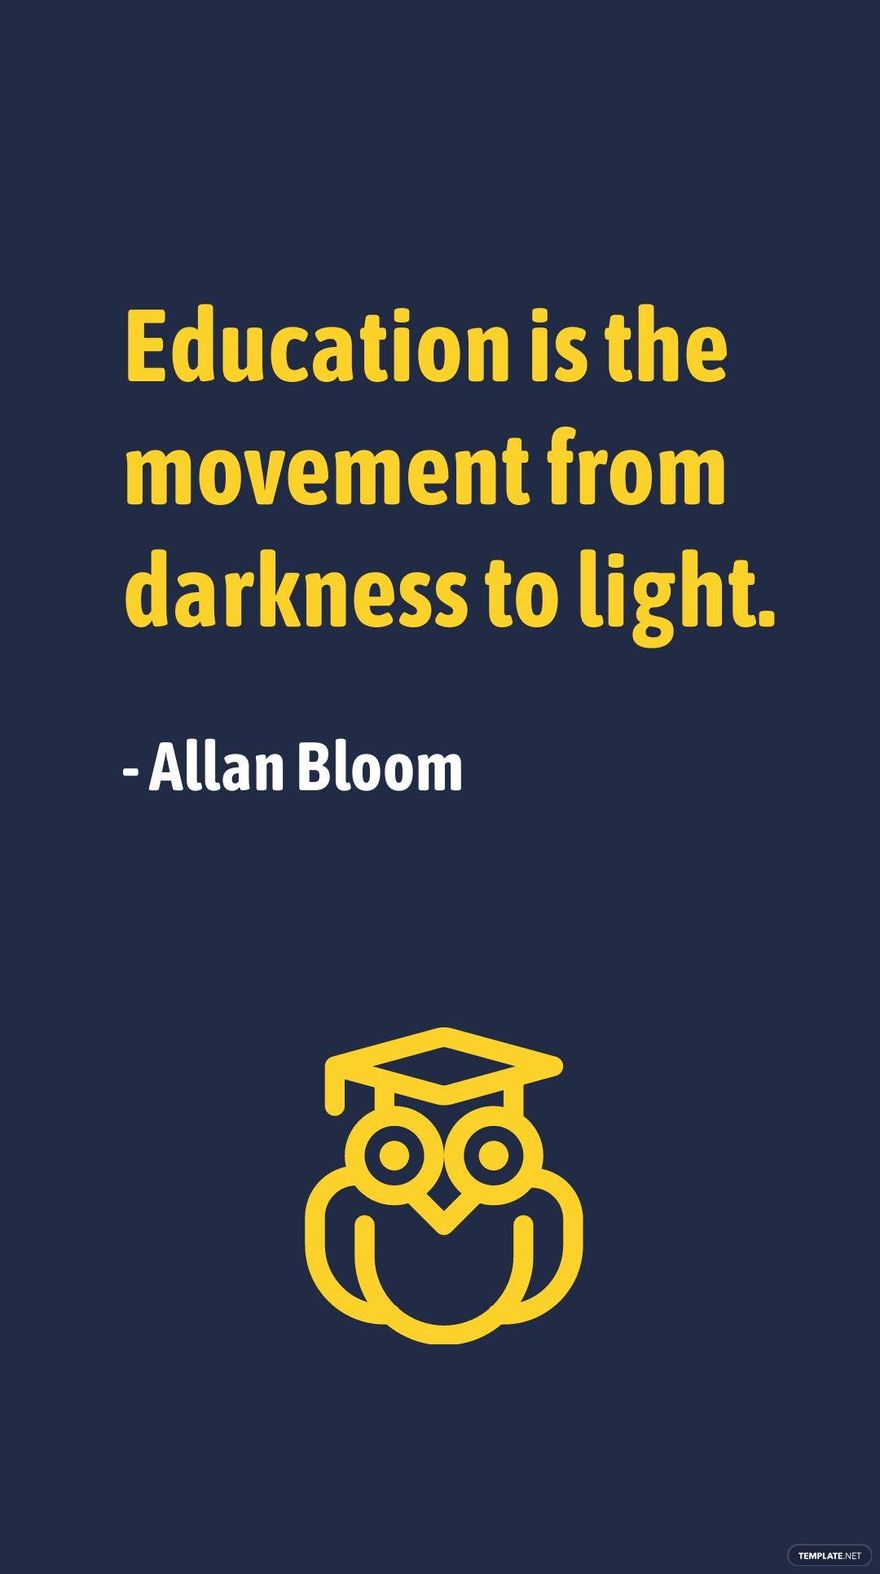 Allan Bloom - Education is the movement from darkness to light.